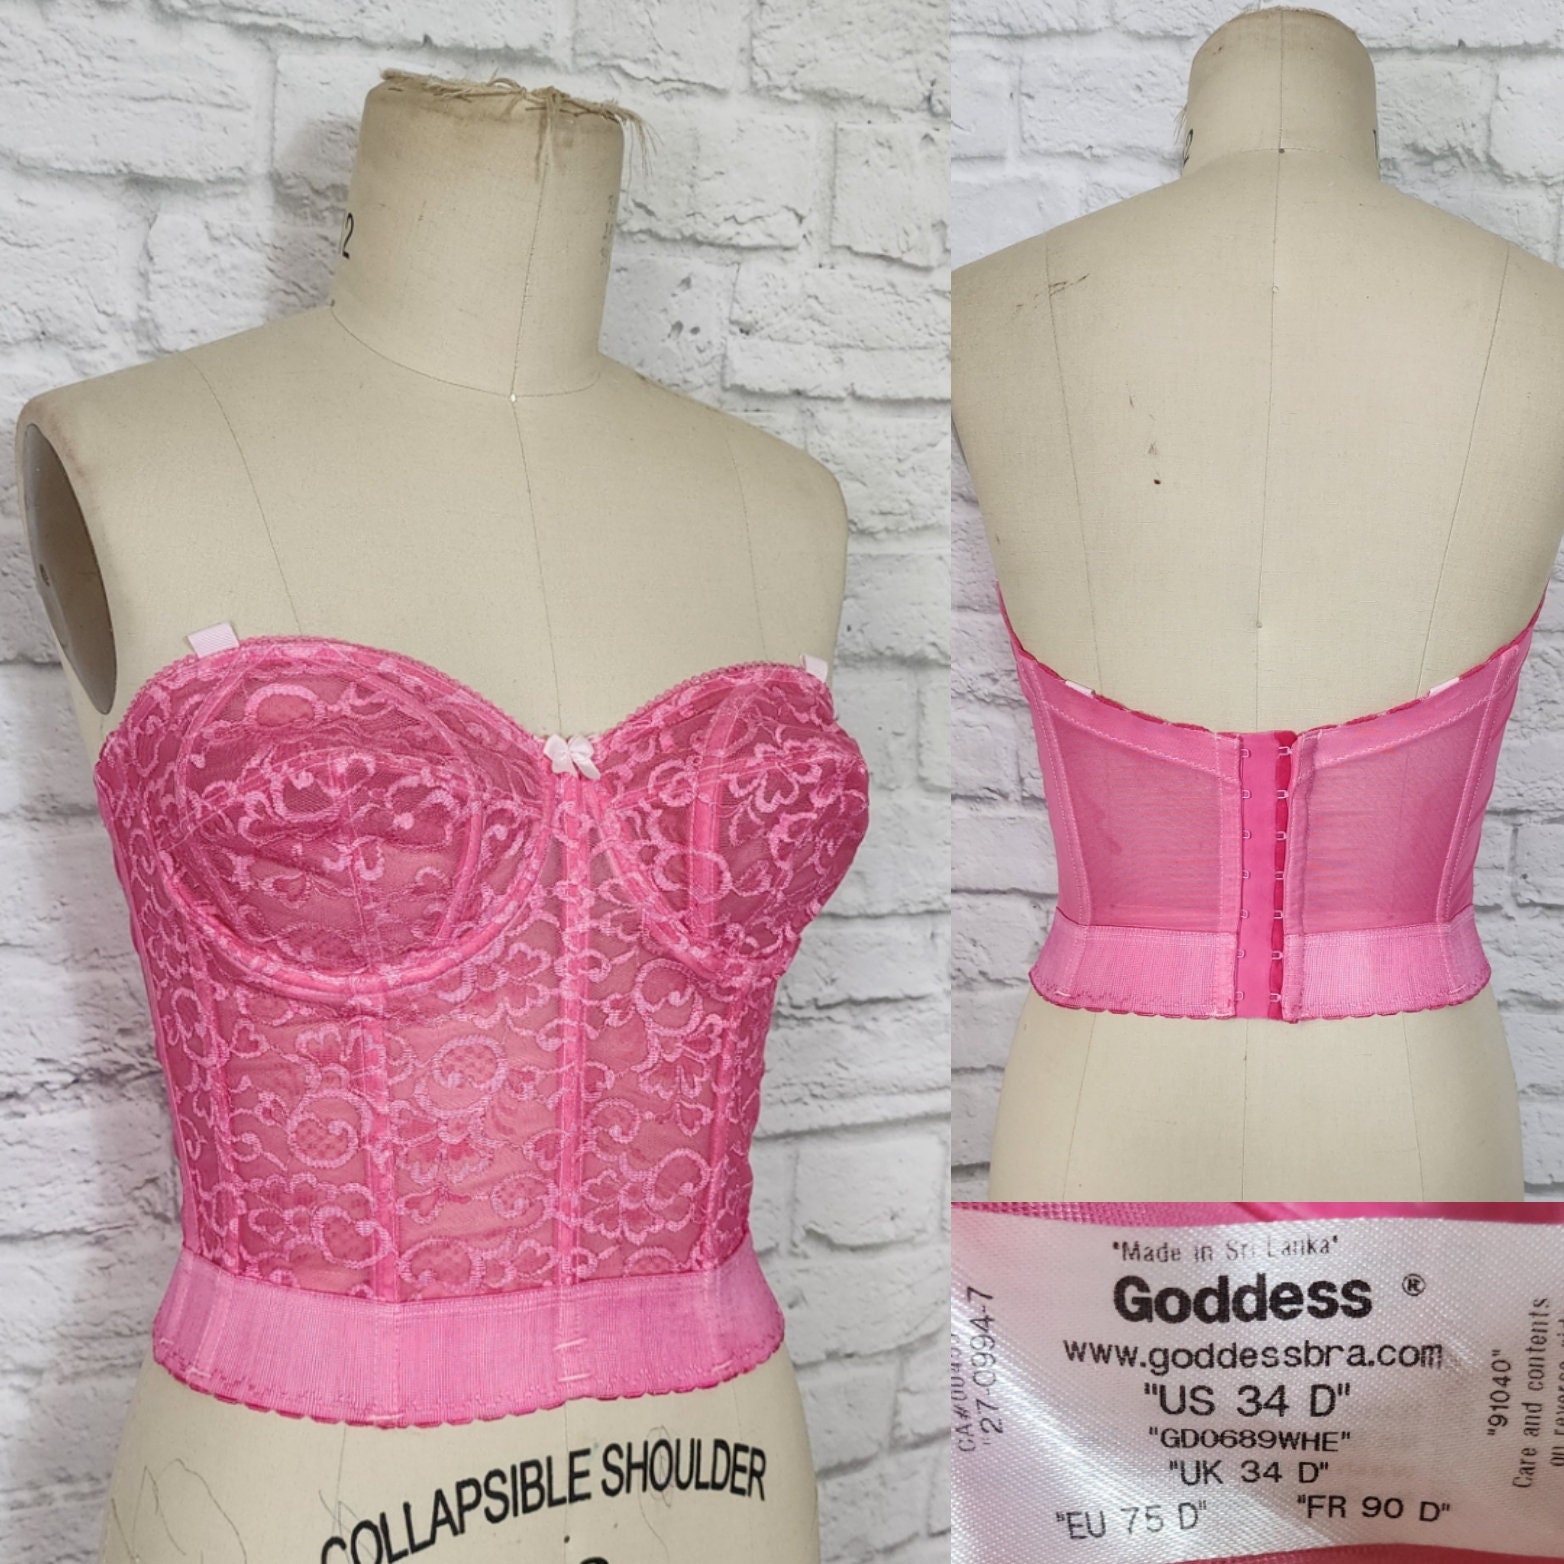 Vintage Pink Lace Up Corset Bustier Lingerie For Women Plus Size Burlesque  Costume For Halloween And Special Occasions Style X0823 From  Yyysl_designer, $12.23